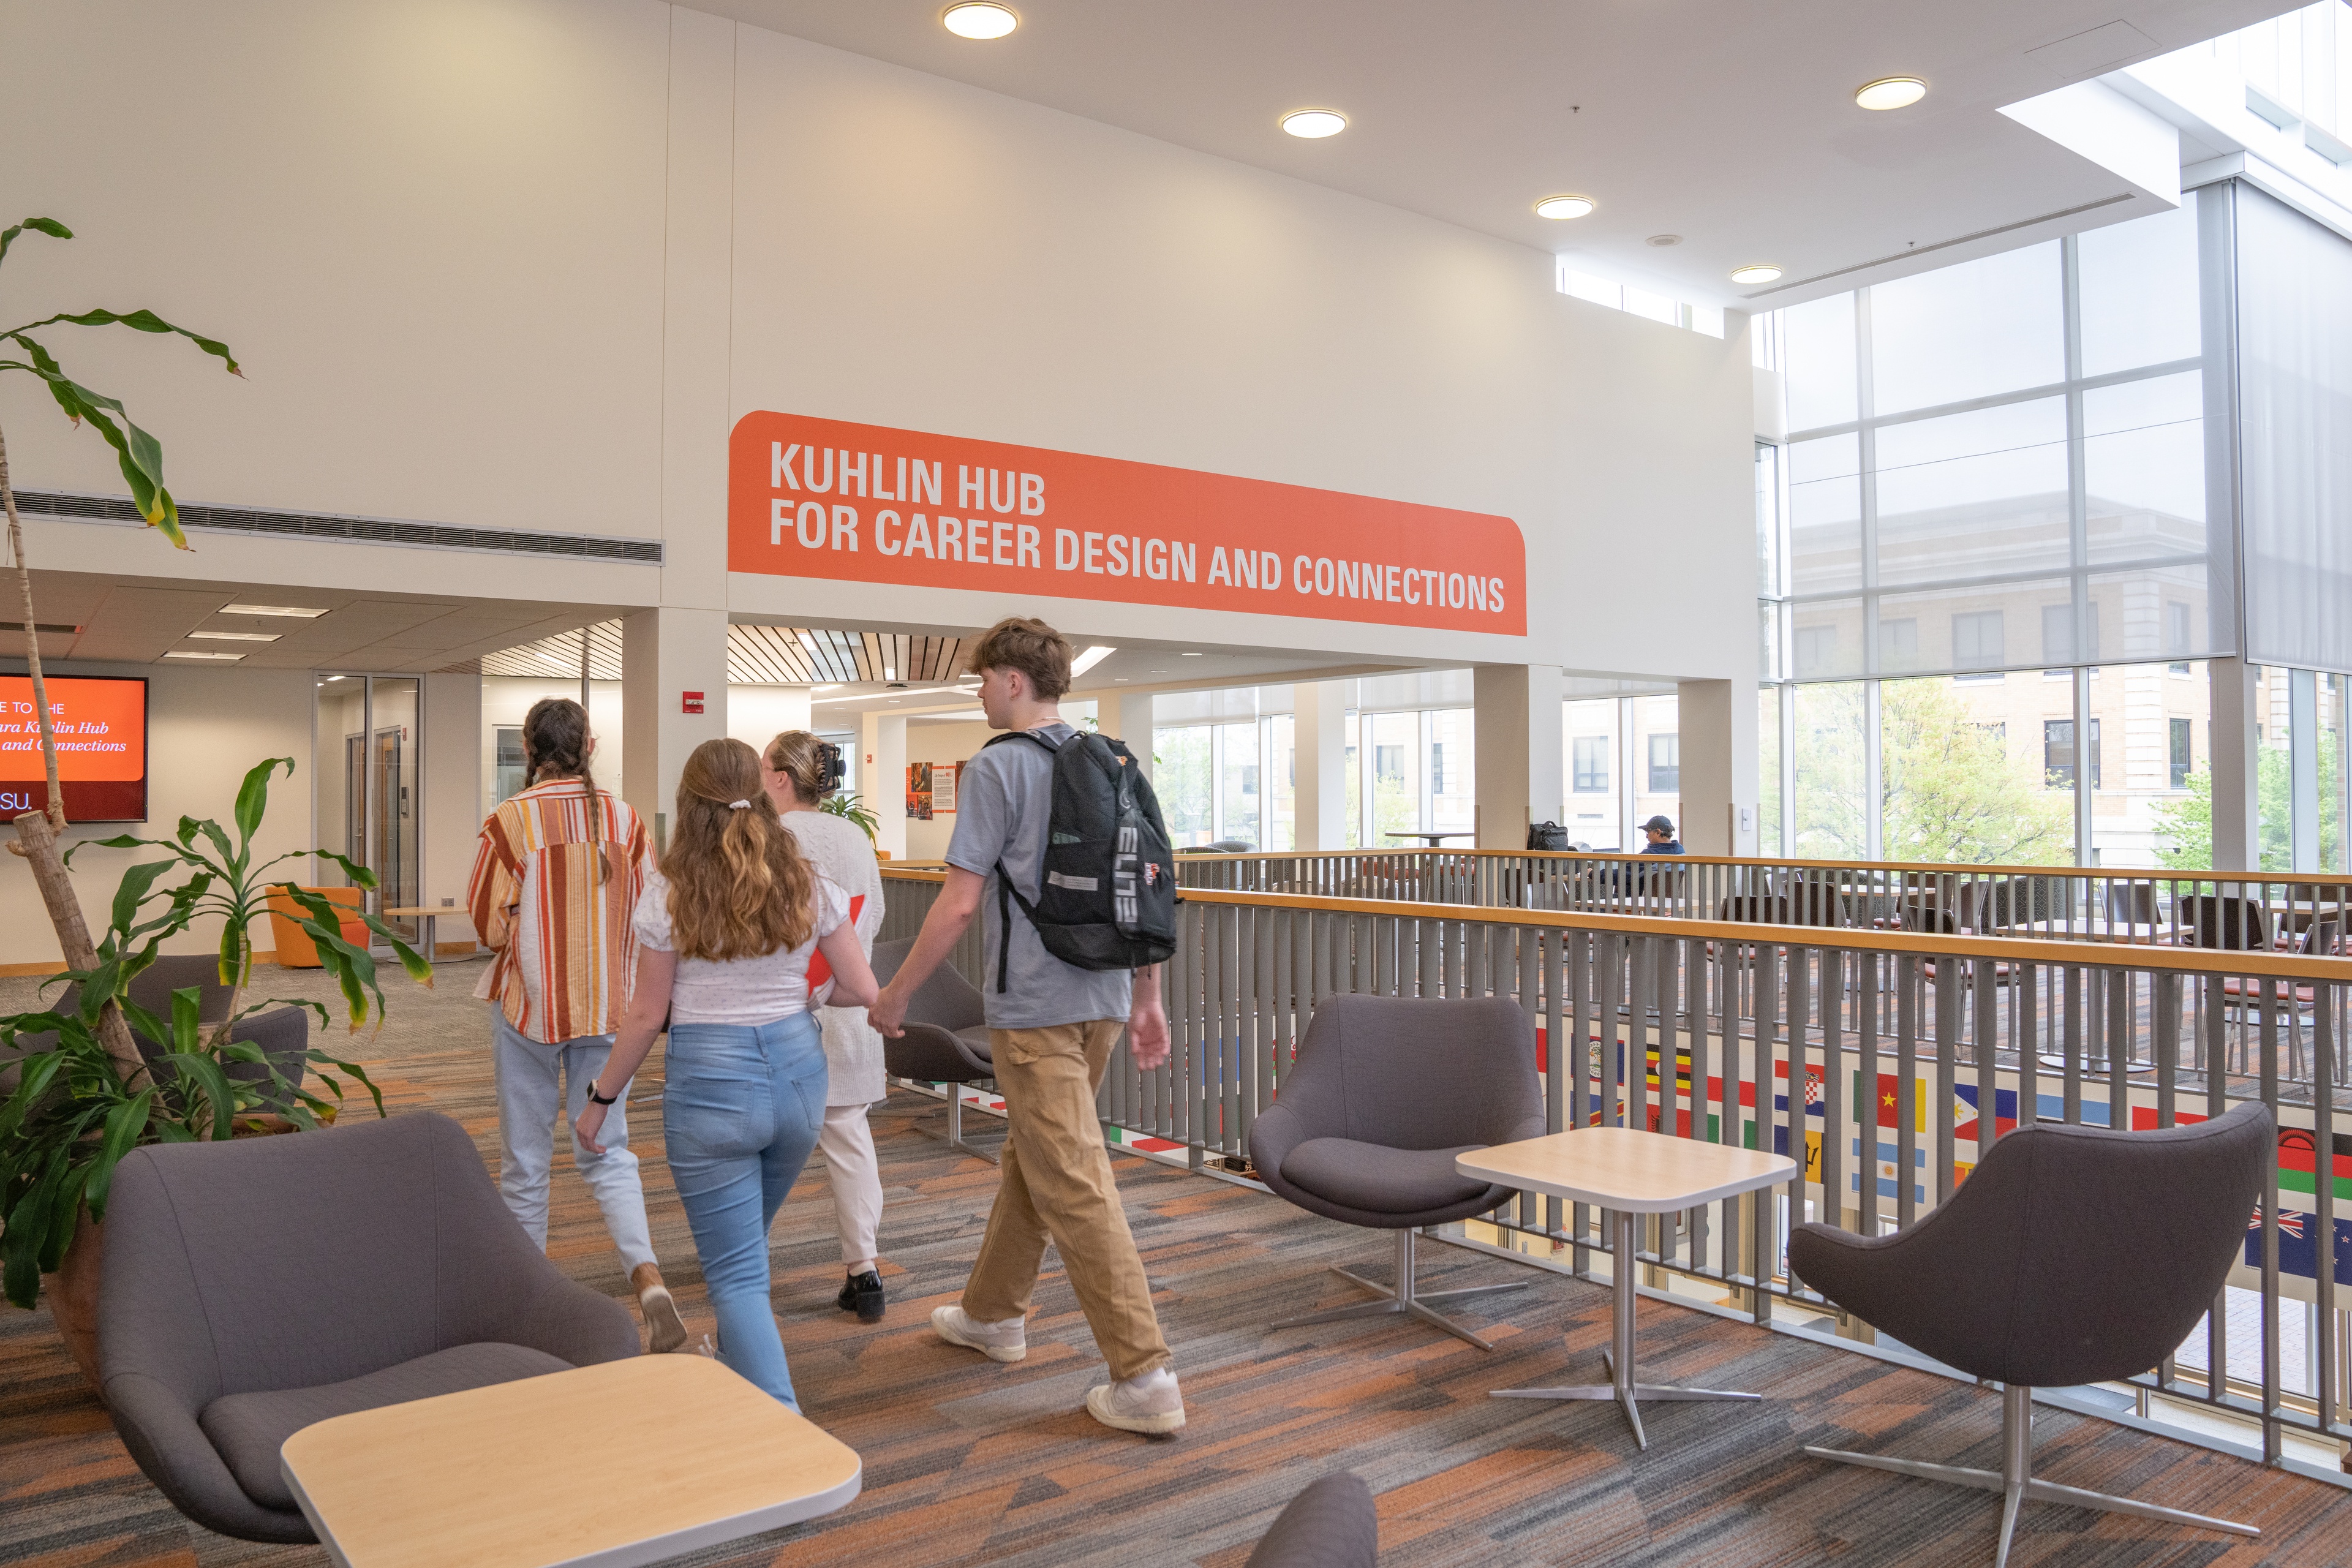 Students walk toward the Michael and Sara Kuhlin Hub for Career Design and Connections on the second floor of the Bowen-Thompson Student Union